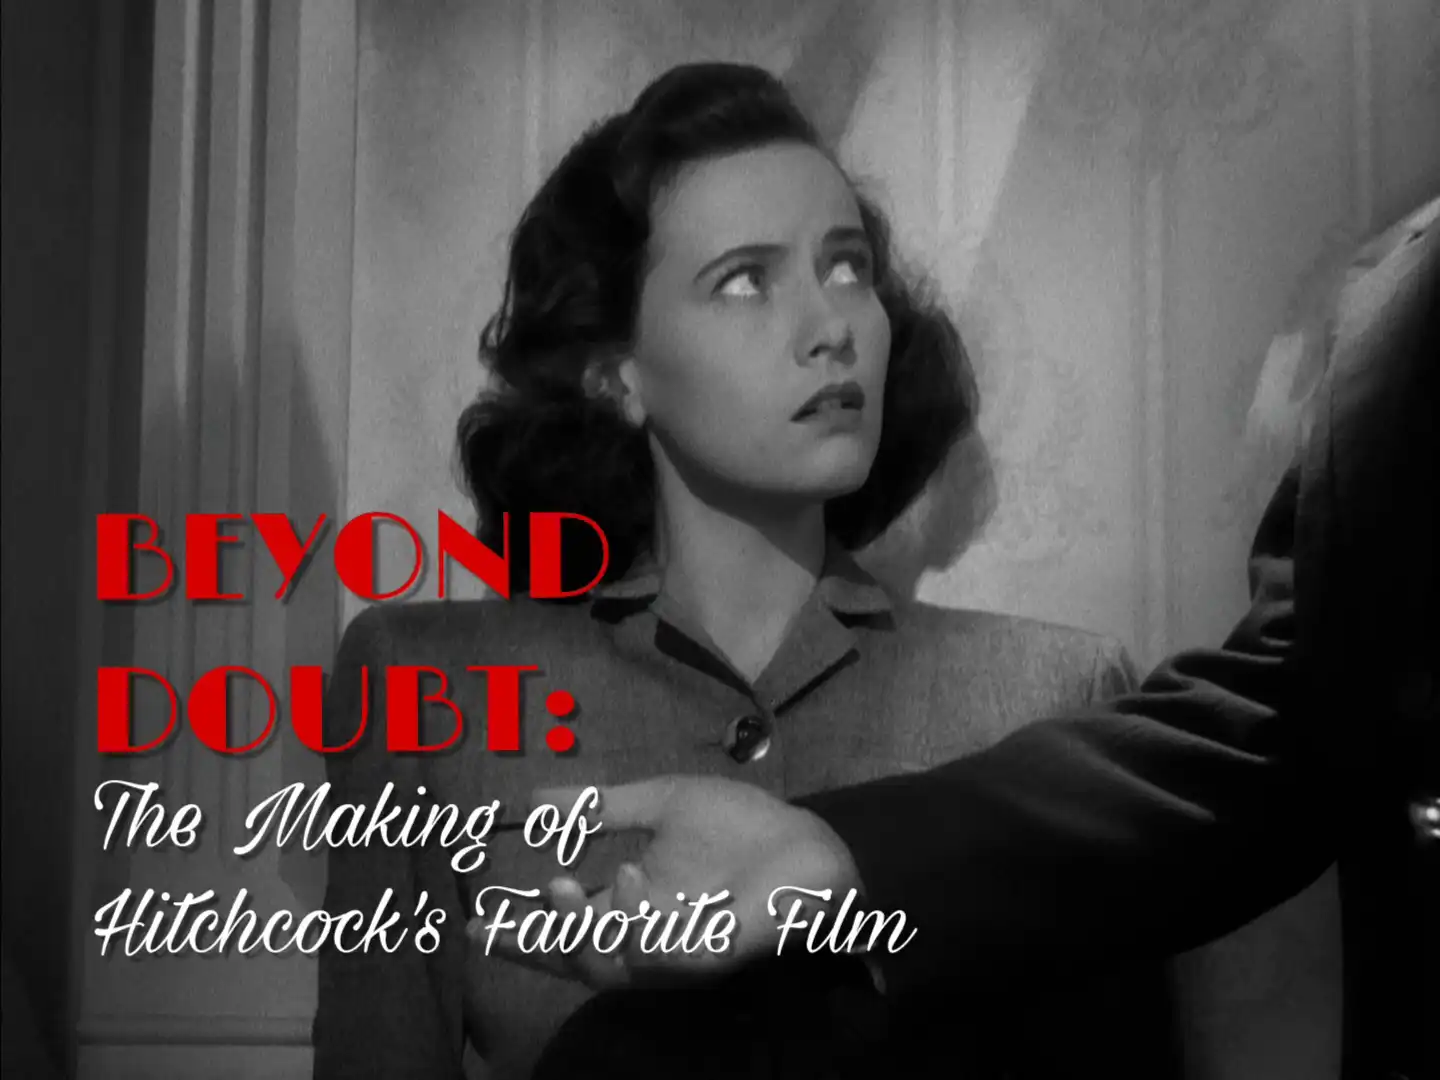 Watch and Download Beyond Doubt: The Making of Hitchcock's Favorite Film 1